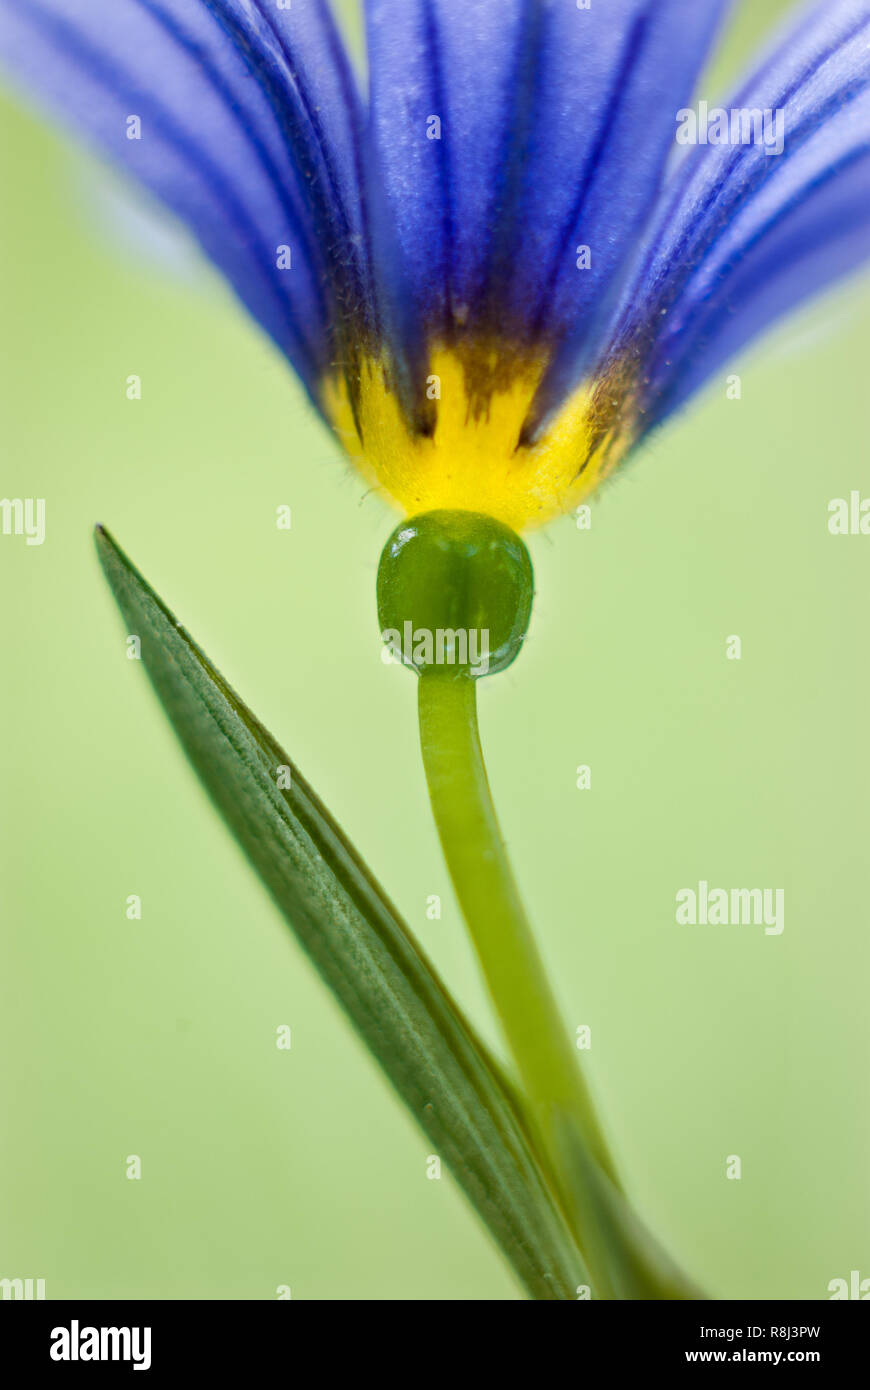 Narrow-leaf blue-eyed grass (Sisyrinchium angustifolium). 'Grass' in common name comes from the plant's narrow, grass-like leaves, but is rather a mem Stock Photo